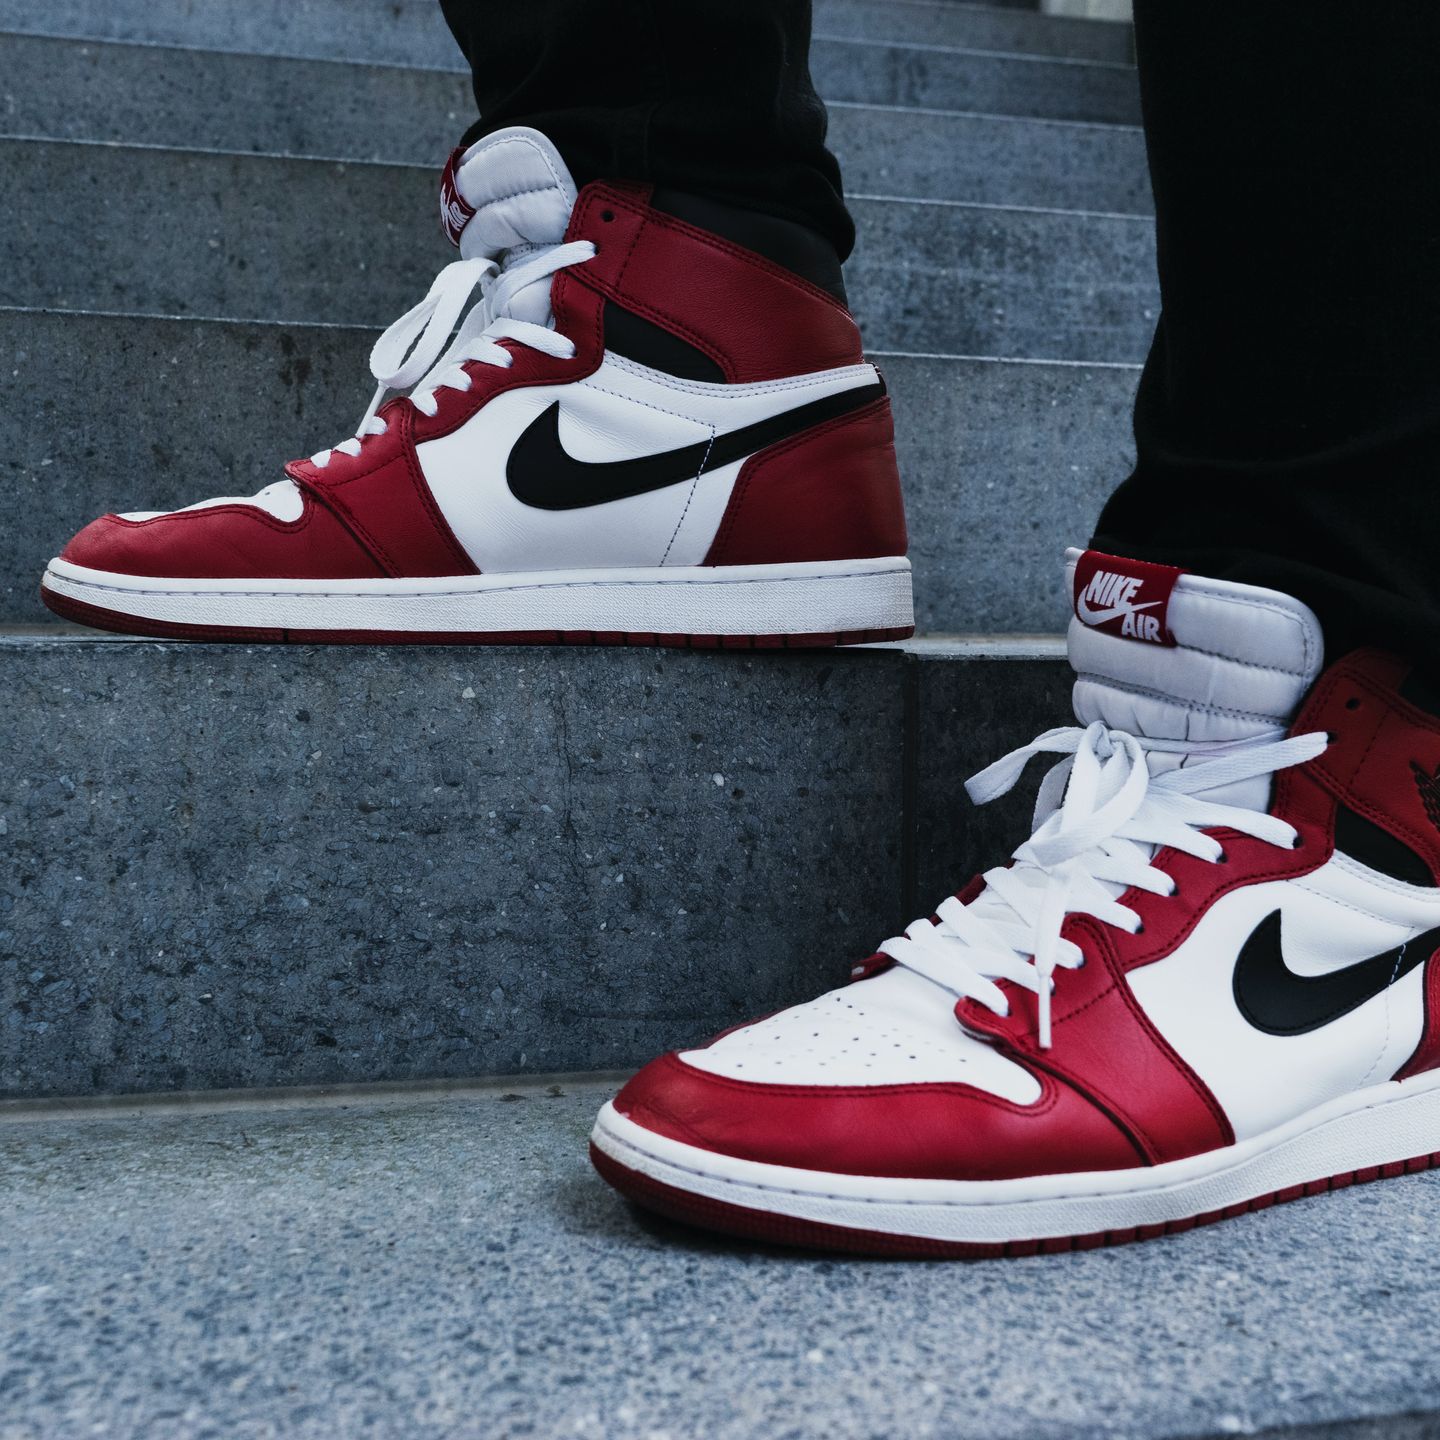 a person is wearing a pair of red and white nike air jordan 1 sneakers .​​​​‌﻿‍﻿​‍​‍‌‍﻿﻿‌﻿​‍‌‍‍‌‌‍‌﻿‌‍‍‌‌‍﻿‍​‍​‍​﻿‍‍​‍​‍‌﻿​﻿‌‍​‌‌‍﻿‍‌‍‍‌‌﻿‌​‌﻿‍‌​‍﻿‍‌‍‍‌‌‍﻿﻿​‍​‍​‍﻿​​‍​‍‌‍‍​‌﻿​‍‌‍‌‌‌‍‌‍​‍​‍​﻿‍‍​‍​‍‌‍‍​‌﻿‌​‌﻿‌​‌﻿​​‌﻿​﻿​﻿‍‍​‍﻿﻿​‍﻿﻿‌﻿‌‍‌‍‍‌‌﻿​﻿‌﻿‌‌‌‍​‌‌‍﻿​​‍﻿‌‌‍‌‌‌‍‌​‌‍‍‌‌﻿‌​‌‍‍‌‌‍﻿‍‌‍‌﻿​‍﻿‌‌﻿​﻿‌﻿‌​‌﻿‌‌‌‍‌​‌‍‍‌‌‍﻿﻿​‍﻿‍‌﻿​﻿‌‍​‌‌‍﻿‍‌‍‍‌‌﻿‌​‌﻿‍‌​‍﻿‍‌‍​‍‌﻿‌‌‌‍‍‌‌‍﻿​‌‍‌​​‍﻿﻿‌﻿​‍‌‍‌‌‌‍﻿‌‌‍‍‌‌﻿‍​​‍﻿﻿‌‍‍‌‌‍﻿‍‌﻿‌​‌‍‌‌‌‍﻿‍‌﻿‌​​‍﻿﻿‌‍‌‌‌‍‌​‌‍‍‌‌﻿‌​​‍﻿﻿‌‍﻿‌‌‍﻿﻿‌‍‌​‌‍‌‌​﻿﻿‌‌﻿​​‌﻿​‍‌‍‌‌‌﻿​﻿‌‍‌‌‌‍﻿‍‌﻿‌​‌‍​‌‌﻿‌​‌‍‍‌‌‍﻿﻿‌‍﻿‍​﻿‍﻿‌‍‍‌‌‍‌​​﻿﻿‌​﻿‌‍‌‍‌‌​﻿‌﻿‌‍​‌‌‍‌‍​﻿​‌​﻿‍​‌‍​﻿​‍﻿‌​﻿‌​‌‍‌​​﻿​‌​﻿​﻿​‍﻿‌​﻿‌​​﻿‌‌​﻿‌​​﻿‌​​‍﻿‌‌‍​‍​﻿‌​‌‍​‌‌‍‌‍​‍﻿‌​﻿‌‌​﻿​‍​﻿​‍‌‍​﻿‌‍​‌​﻿‌﻿​﻿‌‍​﻿‌‍​﻿‌‍​﻿​﻿‌‍‌​‌‍​‍​﻿‍﻿‌﻿‌​‌﻿‍‌‌﻿​​‌‍‌‌​﻿﻿‌‌﻿​﻿‌‍‍​‌‍﻿﻿‌‍‌‌​﻿‍﻿‌﻿​​‌‍​‌‌﻿‌​‌‍‍​​﻿﻿‌‌‍﻿‌‌‍‌‌‌‍‌​‌‍‍‌‌‍​‌​‍‌‌​﻿‌‌‌​​‍‌‌﻿﻿‌‍‍﻿‌‍‌‌‌﻿‍‌​‍‌‌​﻿​﻿‌​‌​​‍‌‌​﻿​﻿‌​‌​​‍‌‌​﻿​‍​﻿​‍​﻿​​​﻿‌​​﻿​‍​﻿‌​​﻿‌﻿‌‍‌​​﻿‌​​﻿‍​​﻿‌﻿‌‍​‌‌‍​‍‌‍‌‍​‍‌‌​﻿​‍​﻿​‍​‍‌‌​﻿‌‌‌​‌​​‍﻿‍‌‍​‌‌‍﻿​‌﻿‌​​﻿‍﻿‌﻿‌​‌‍﻿﻿‌‍﻿﻿‌‍﻿​​﻿﻿‌‌﻿​​‌﻿​‍‌‍‌‌‌﻿​﻿‌‍‌‌‌‍﻿‍‌﻿‌​‌‍​‌‌﻿‌​‌‍‍‌‌‍﻿﻿‌‍﻿‍​﻿﻿﻿‌‍​‍‌‍​‌‌﻿​﻿‌‍‌‌‌‌‌‌‌﻿​‍‌‍﻿​​﻿﻿‌‌‍‍​‌﻿‌​‌﻿‌​‌﻿​​‌﻿​﻿​‍‌‌​﻿​﻿‌​​‌​‍‌‌​﻿​‍‌​‌‍​‍‌‌​﻿​‍‌​‌‍‌﻿‌‍‌‍‍‌‌﻿​﻿‌﻿‌‌‌‍​‌‌‍﻿​​‍﻿‌‌‍‌‌‌‍‌​‌‍‍‌‌﻿‌​‌‍‍‌‌‍﻿‍‌‍‌﻿​‍﻿‌‌﻿​﻿‌﻿‌​‌﻿‌‌‌‍‌​‌‍‍‌‌‍﻿﻿​‍﻿‍‌﻿​﻿‌‍​‌‌‍﻿‍‌‍‍‌‌﻿‌​‌﻿‍‌​‍﻿‍‌‍​‍‌﻿‌‌‌‍‍‌‌‍﻿​‌‍‌​​‍‌‍‌‍‍‌‌‍‌​​﻿﻿‌​﻿‌‍‌‍‌‌​﻿‌﻿‌‍​‌‌‍‌‍​﻿​‌​﻿‍​‌‍​﻿​‍﻿‌​﻿‌​‌‍‌​​﻿​‌​﻿​﻿​‍﻿‌​﻿‌​​﻿‌‌​﻿‌​​﻿‌​​‍﻿‌‌‍​‍​﻿‌​‌‍​‌‌‍‌‍​‍﻿‌​﻿‌‌​﻿​‍​﻿​‍‌‍​﻿‌‍​‌​﻿‌﻿​﻿‌‍​﻿‌‍​﻿‌‍​﻿​﻿‌‍‌​‌‍​‍​‍‌‍‌﻿‌​‌﻿‍‌‌﻿​​‌‍‌‌​﻿﻿‌‌﻿​﻿‌‍‍​‌‍﻿﻿‌‍‌‌​‍‌‍‌﻿​​‌‍​‌‌﻿‌​‌‍‍​​﻿﻿‌‌‍﻿‌‌‍‌‌‌‍‌​‌‍‍‌‌‍​‌​‍‌‌​﻿‌‌‌​​‍‌‌﻿﻿‌‍‍﻿‌‍‌‌‌﻿‍‌​‍‌‌​﻿​﻿‌​‌​​‍‌‌​﻿​﻿‌​‌​​‍‌‌​﻿​‍​﻿​‍​﻿​​​﻿‌​​﻿​‍​﻿‌​​﻿‌﻿‌‍‌​​﻿‌​​﻿‍​​﻿‌﻿‌‍​‌‌‍​‍‌‍‌‍​‍‌‌​﻿​‍​﻿​‍​‍‌‌​﻿‌‌‌​‌​​‍﻿‍‌‍​‌‌‍﻿​‌﻿‌​​‍‌‍‌﻿‌﻿‌‍﻿﻿‌﻿​‍‌‍‍﻿‌﻿​﻿‌﻿​​‌‍​‌‌‍​﻿‌‍‌‌​﻿﻿‌‌﻿​‍‌‍‌‌‌‍﻿‌‌‍‍‌‌﻿‍​​‍‌‍‌﻿‌​‌‍﻿﻿‌‍﻿﻿‌‍﻿​​﻿﻿‌‌﻿​​‌﻿​‍‌‍‌‌‌﻿​﻿‌‍‌‌‌‍﻿‍‌﻿‌​‌‍​‌‌﻿‌​‌‍‍‌‌‍﻿﻿‌‍﻿‍​‍​‍‌﻿﻿‌